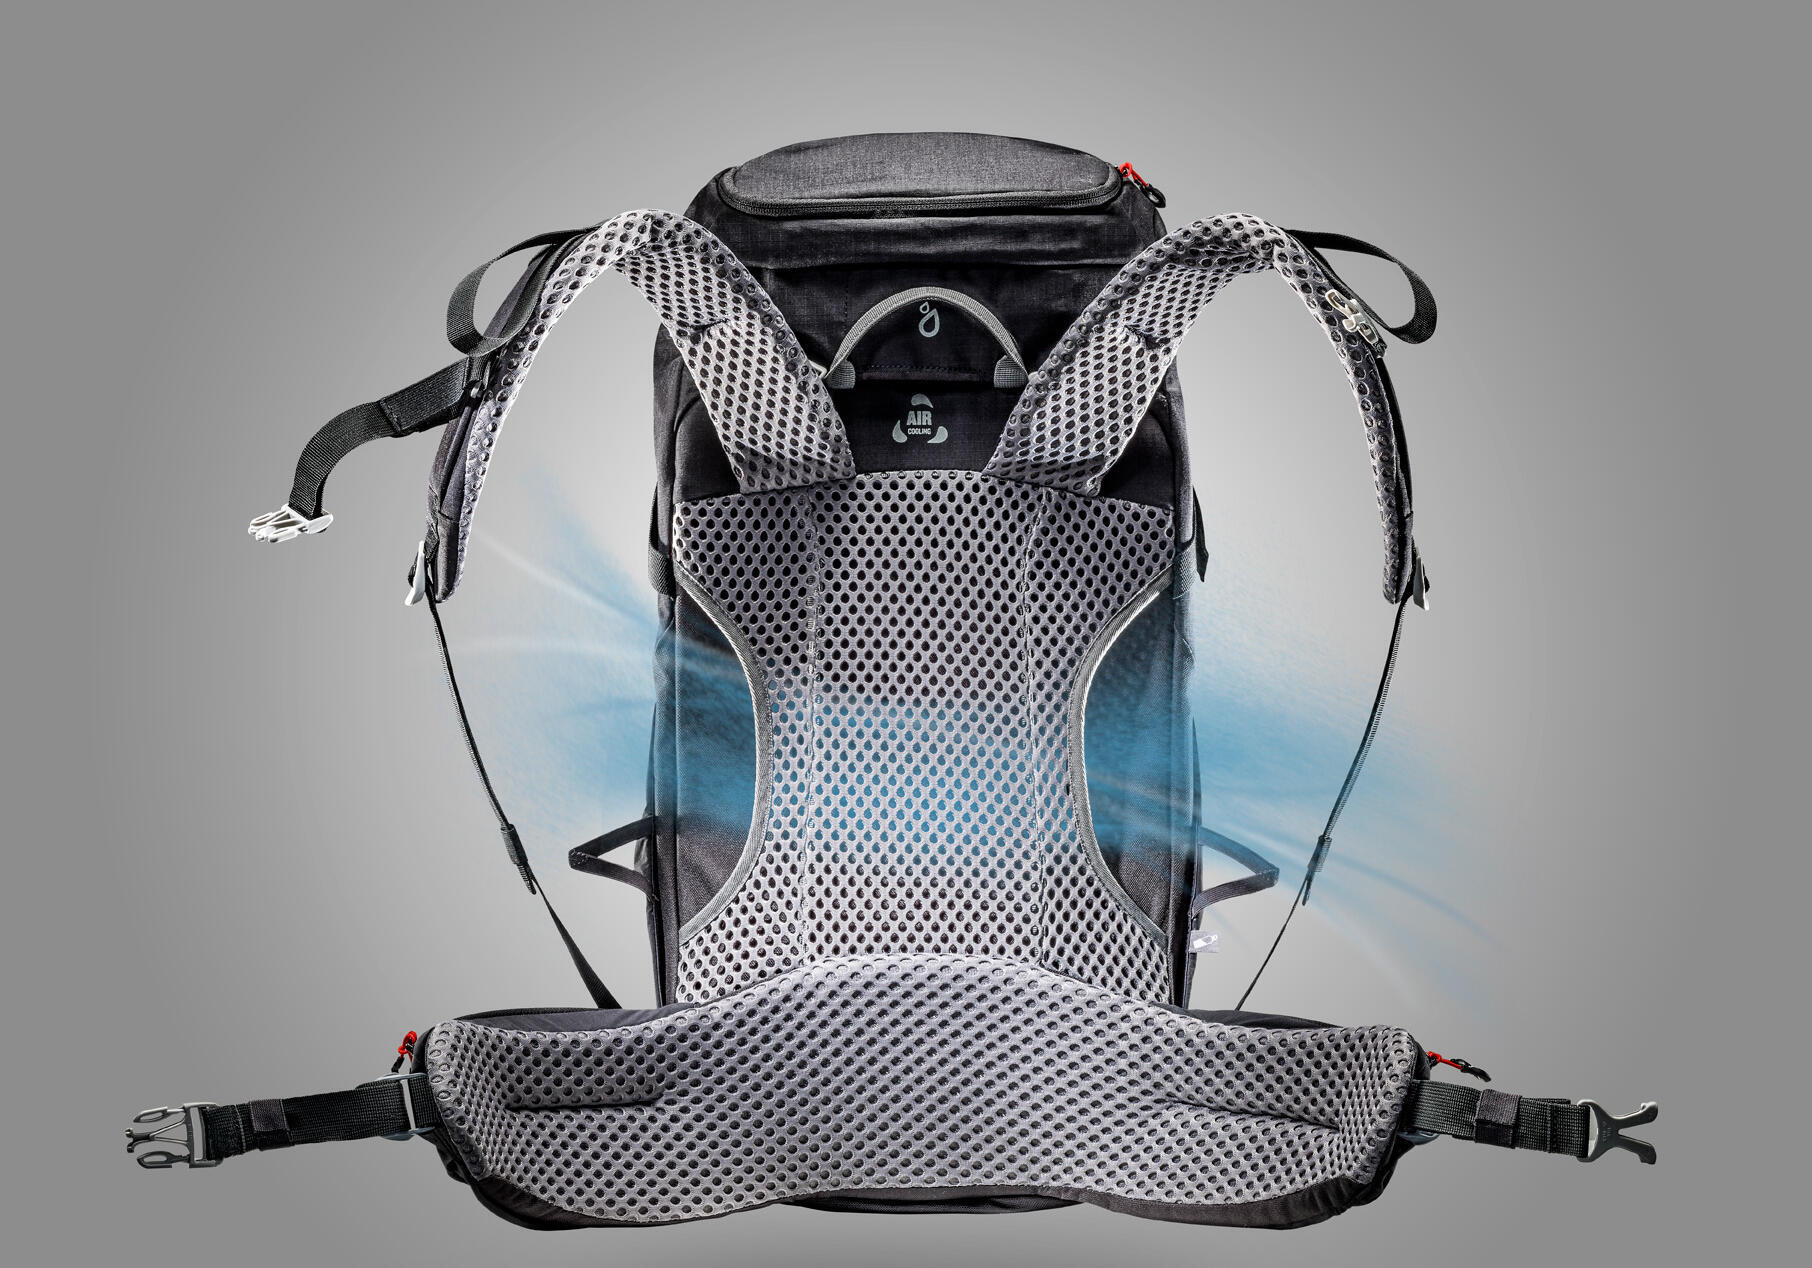 Air cooling, the well ventilated backpack